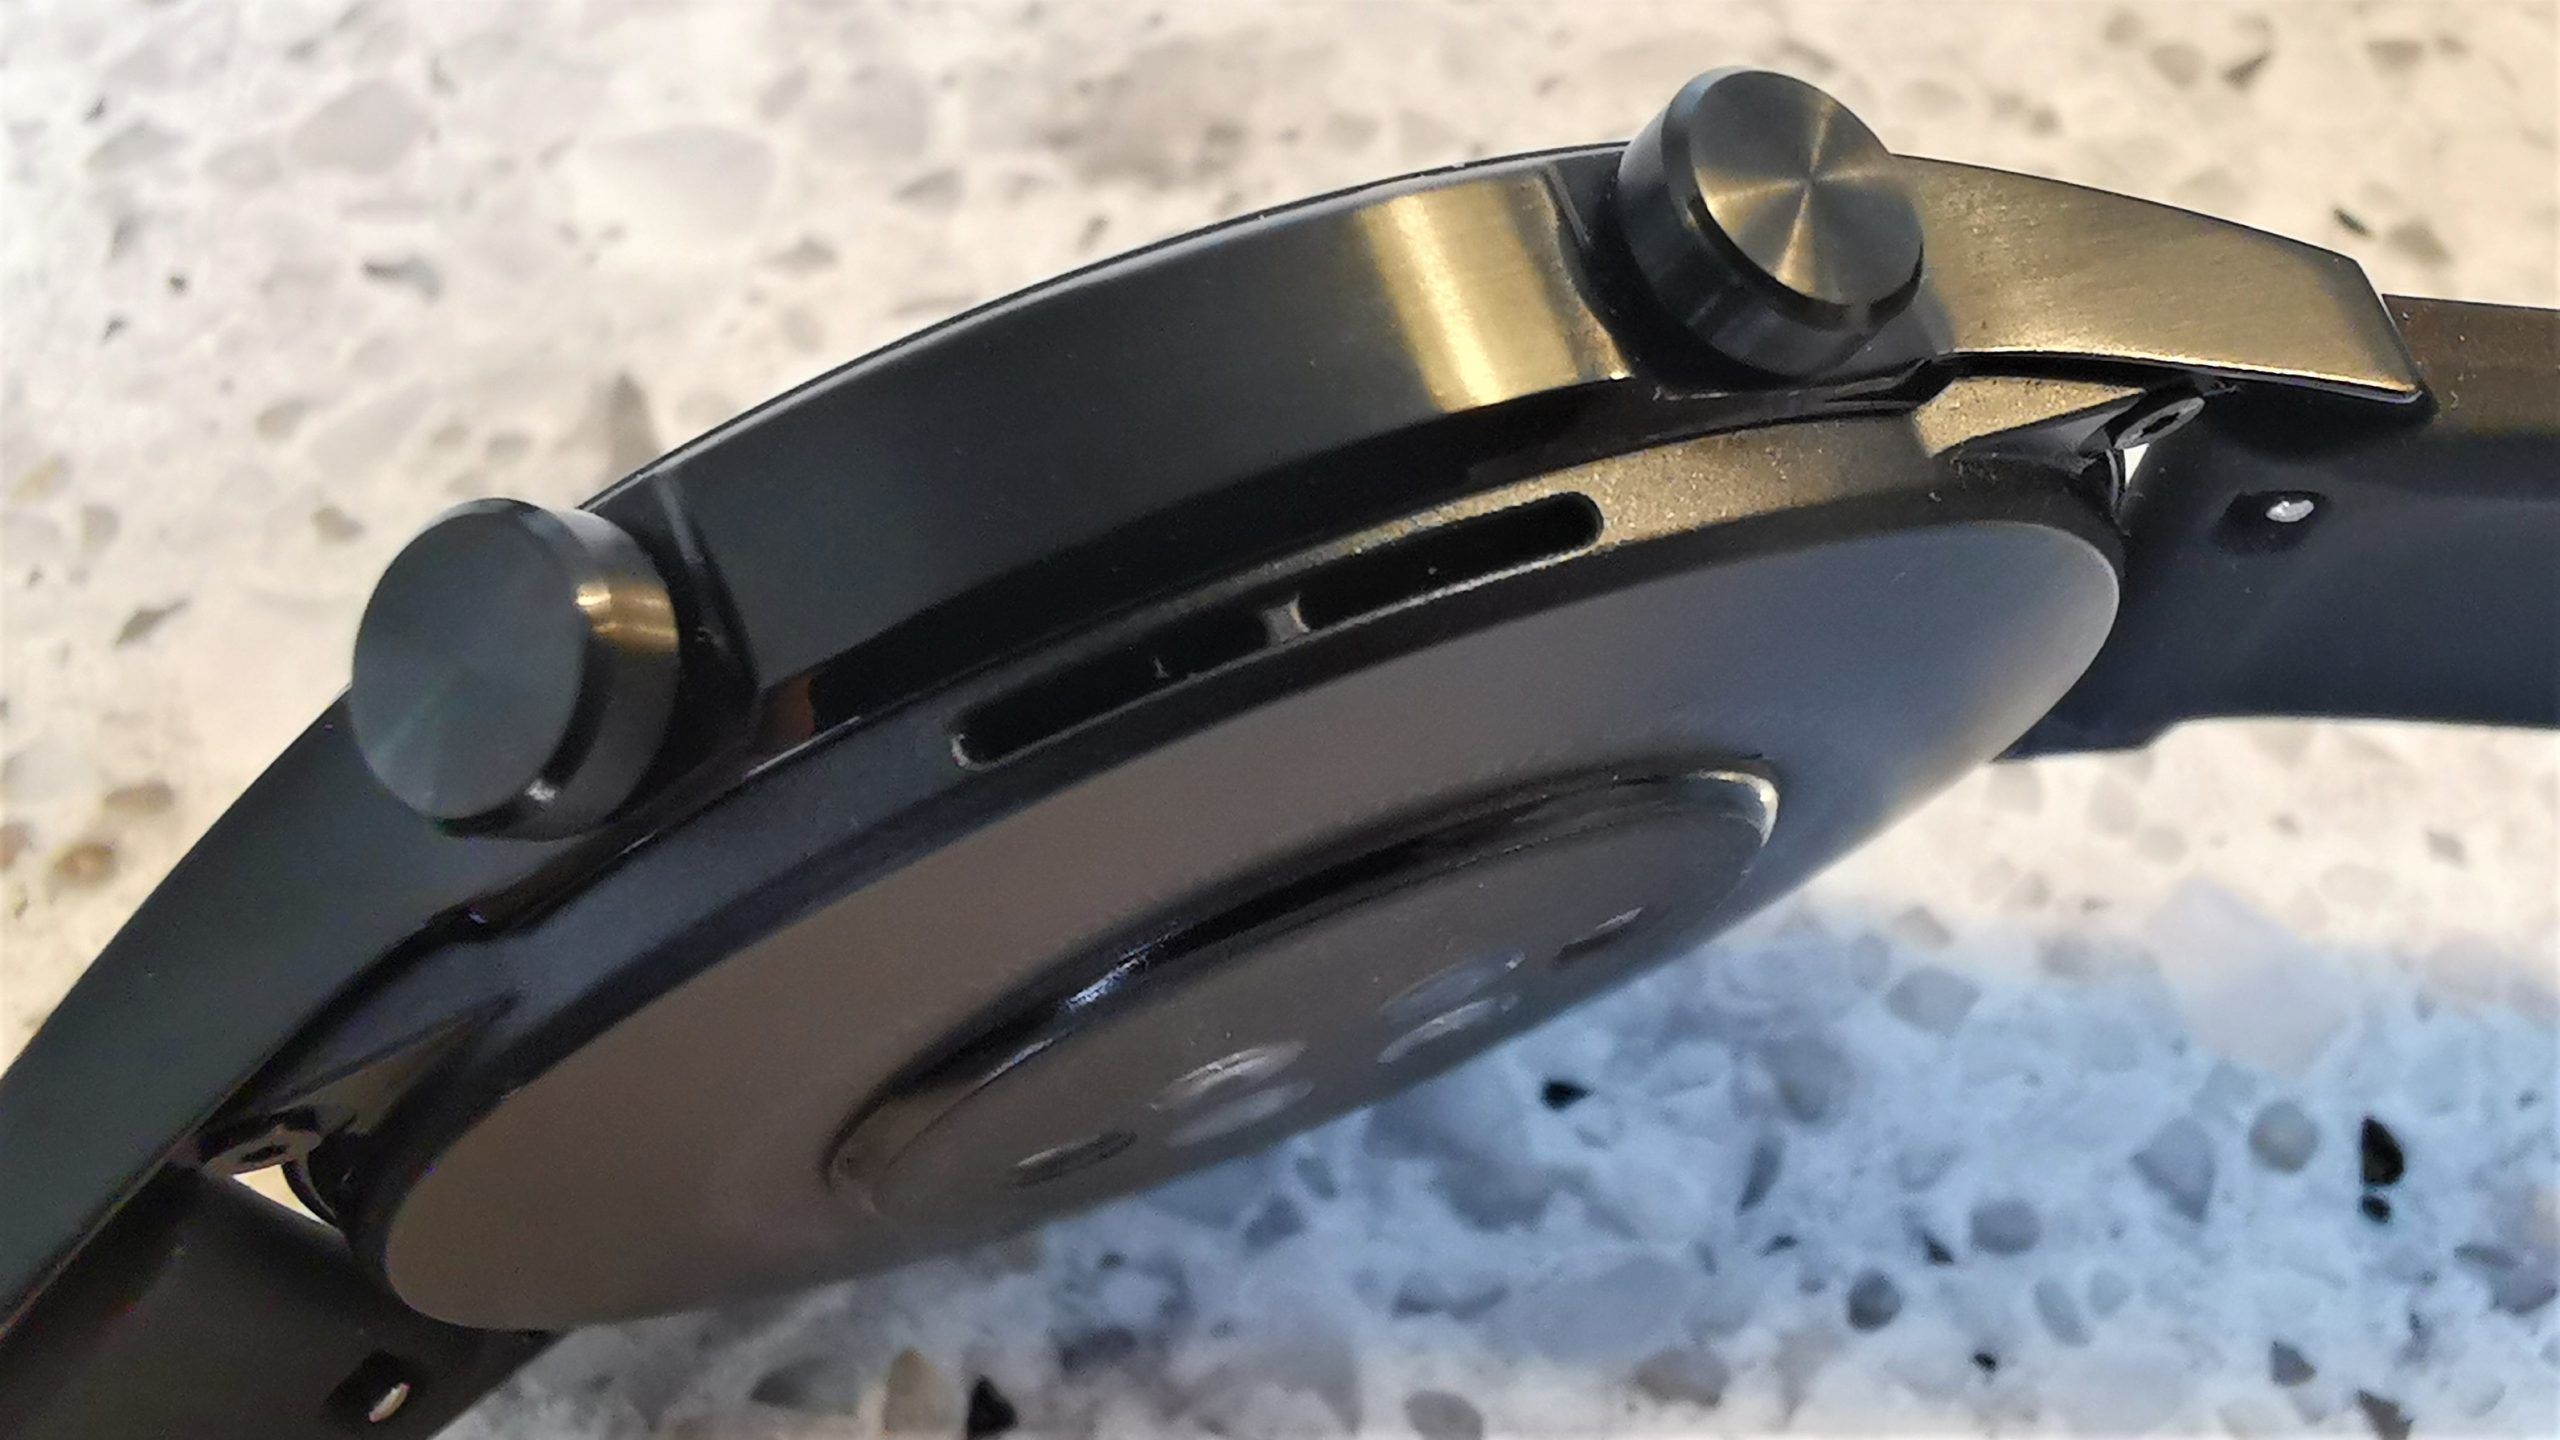 Huawei Watch GT2 Review - Unmatchable 14 Day Battery Life